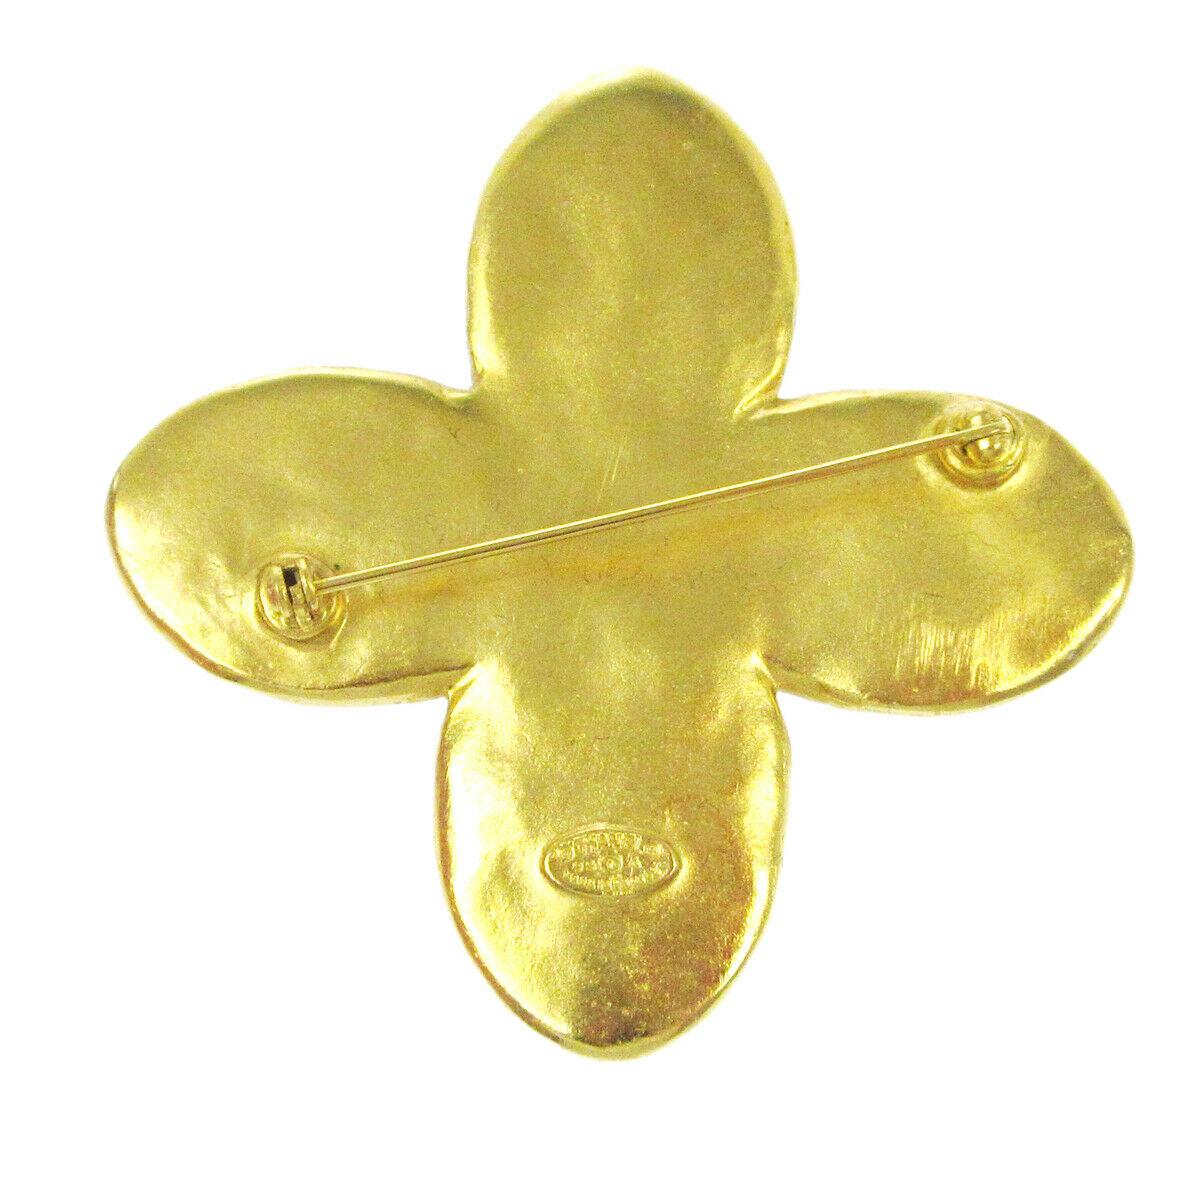 Chanel Gold Charm CC Flower Cross Gripoix Red Glass Evening Pin Brooch

Gripoix
Metal
Gold tone hardware
Pin closure
Made in France
Measures 2.5